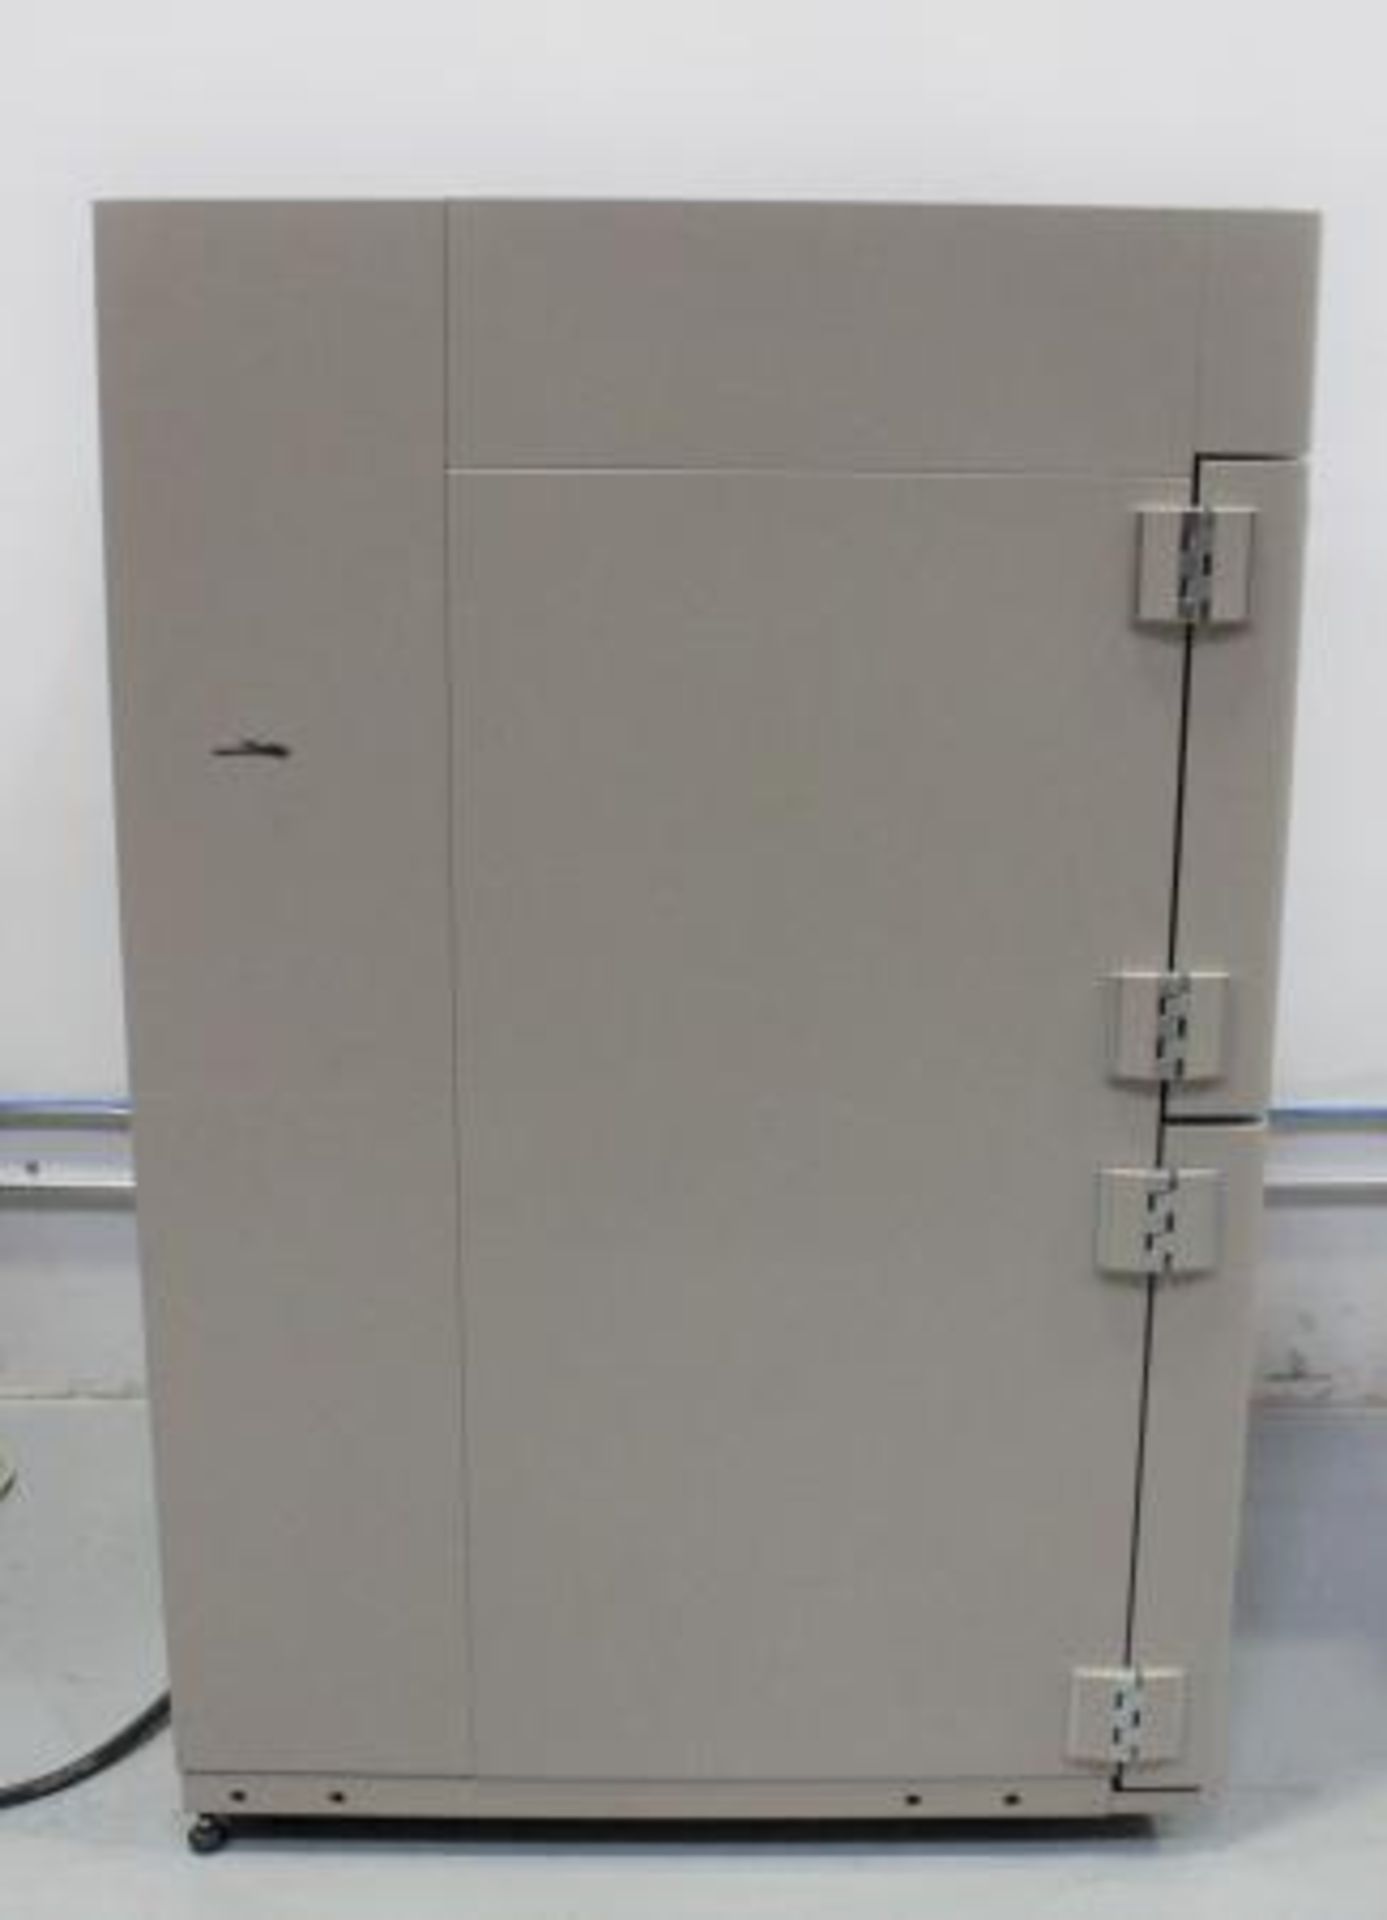 Espec TSE-11-A Thermal Shock Chamber - Image 7 of 8